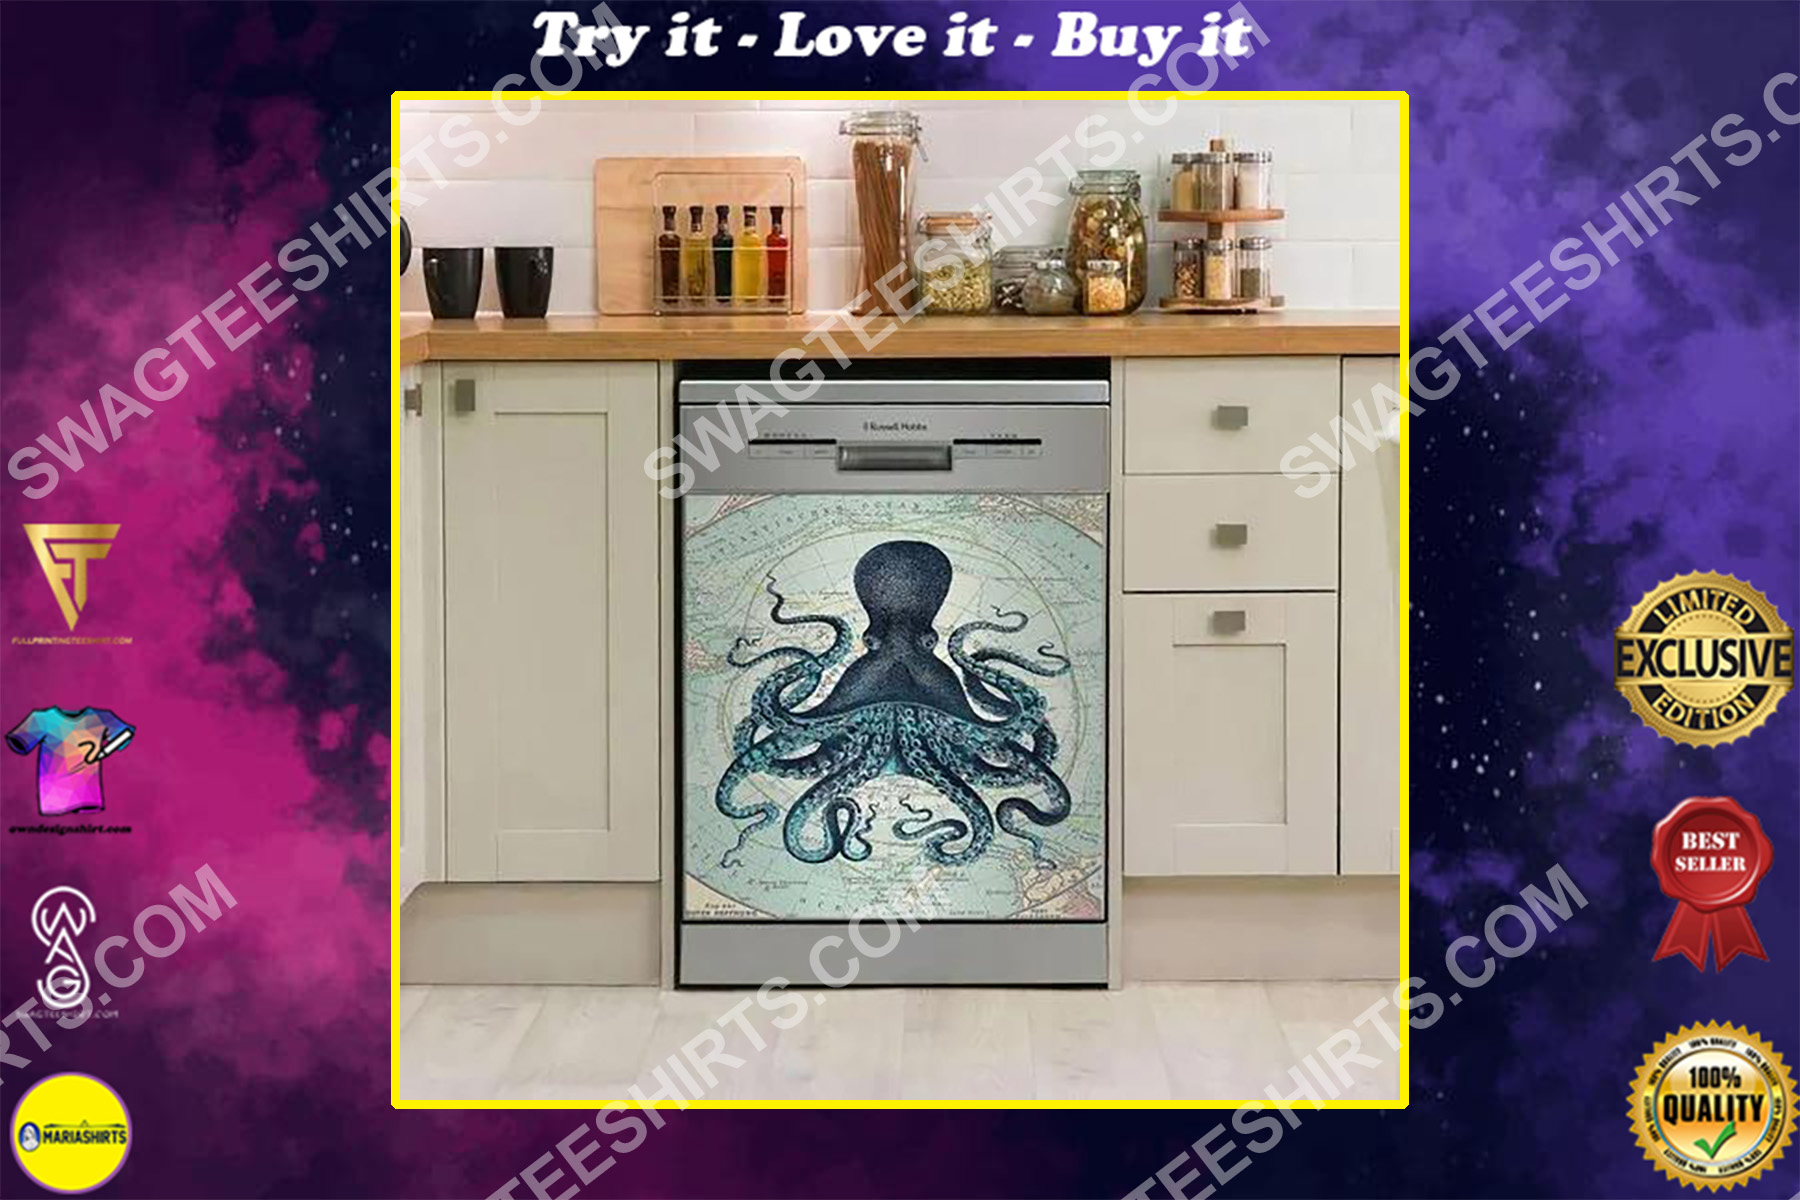 octopus and sea map kitchen decorative dishwasher magnet cover